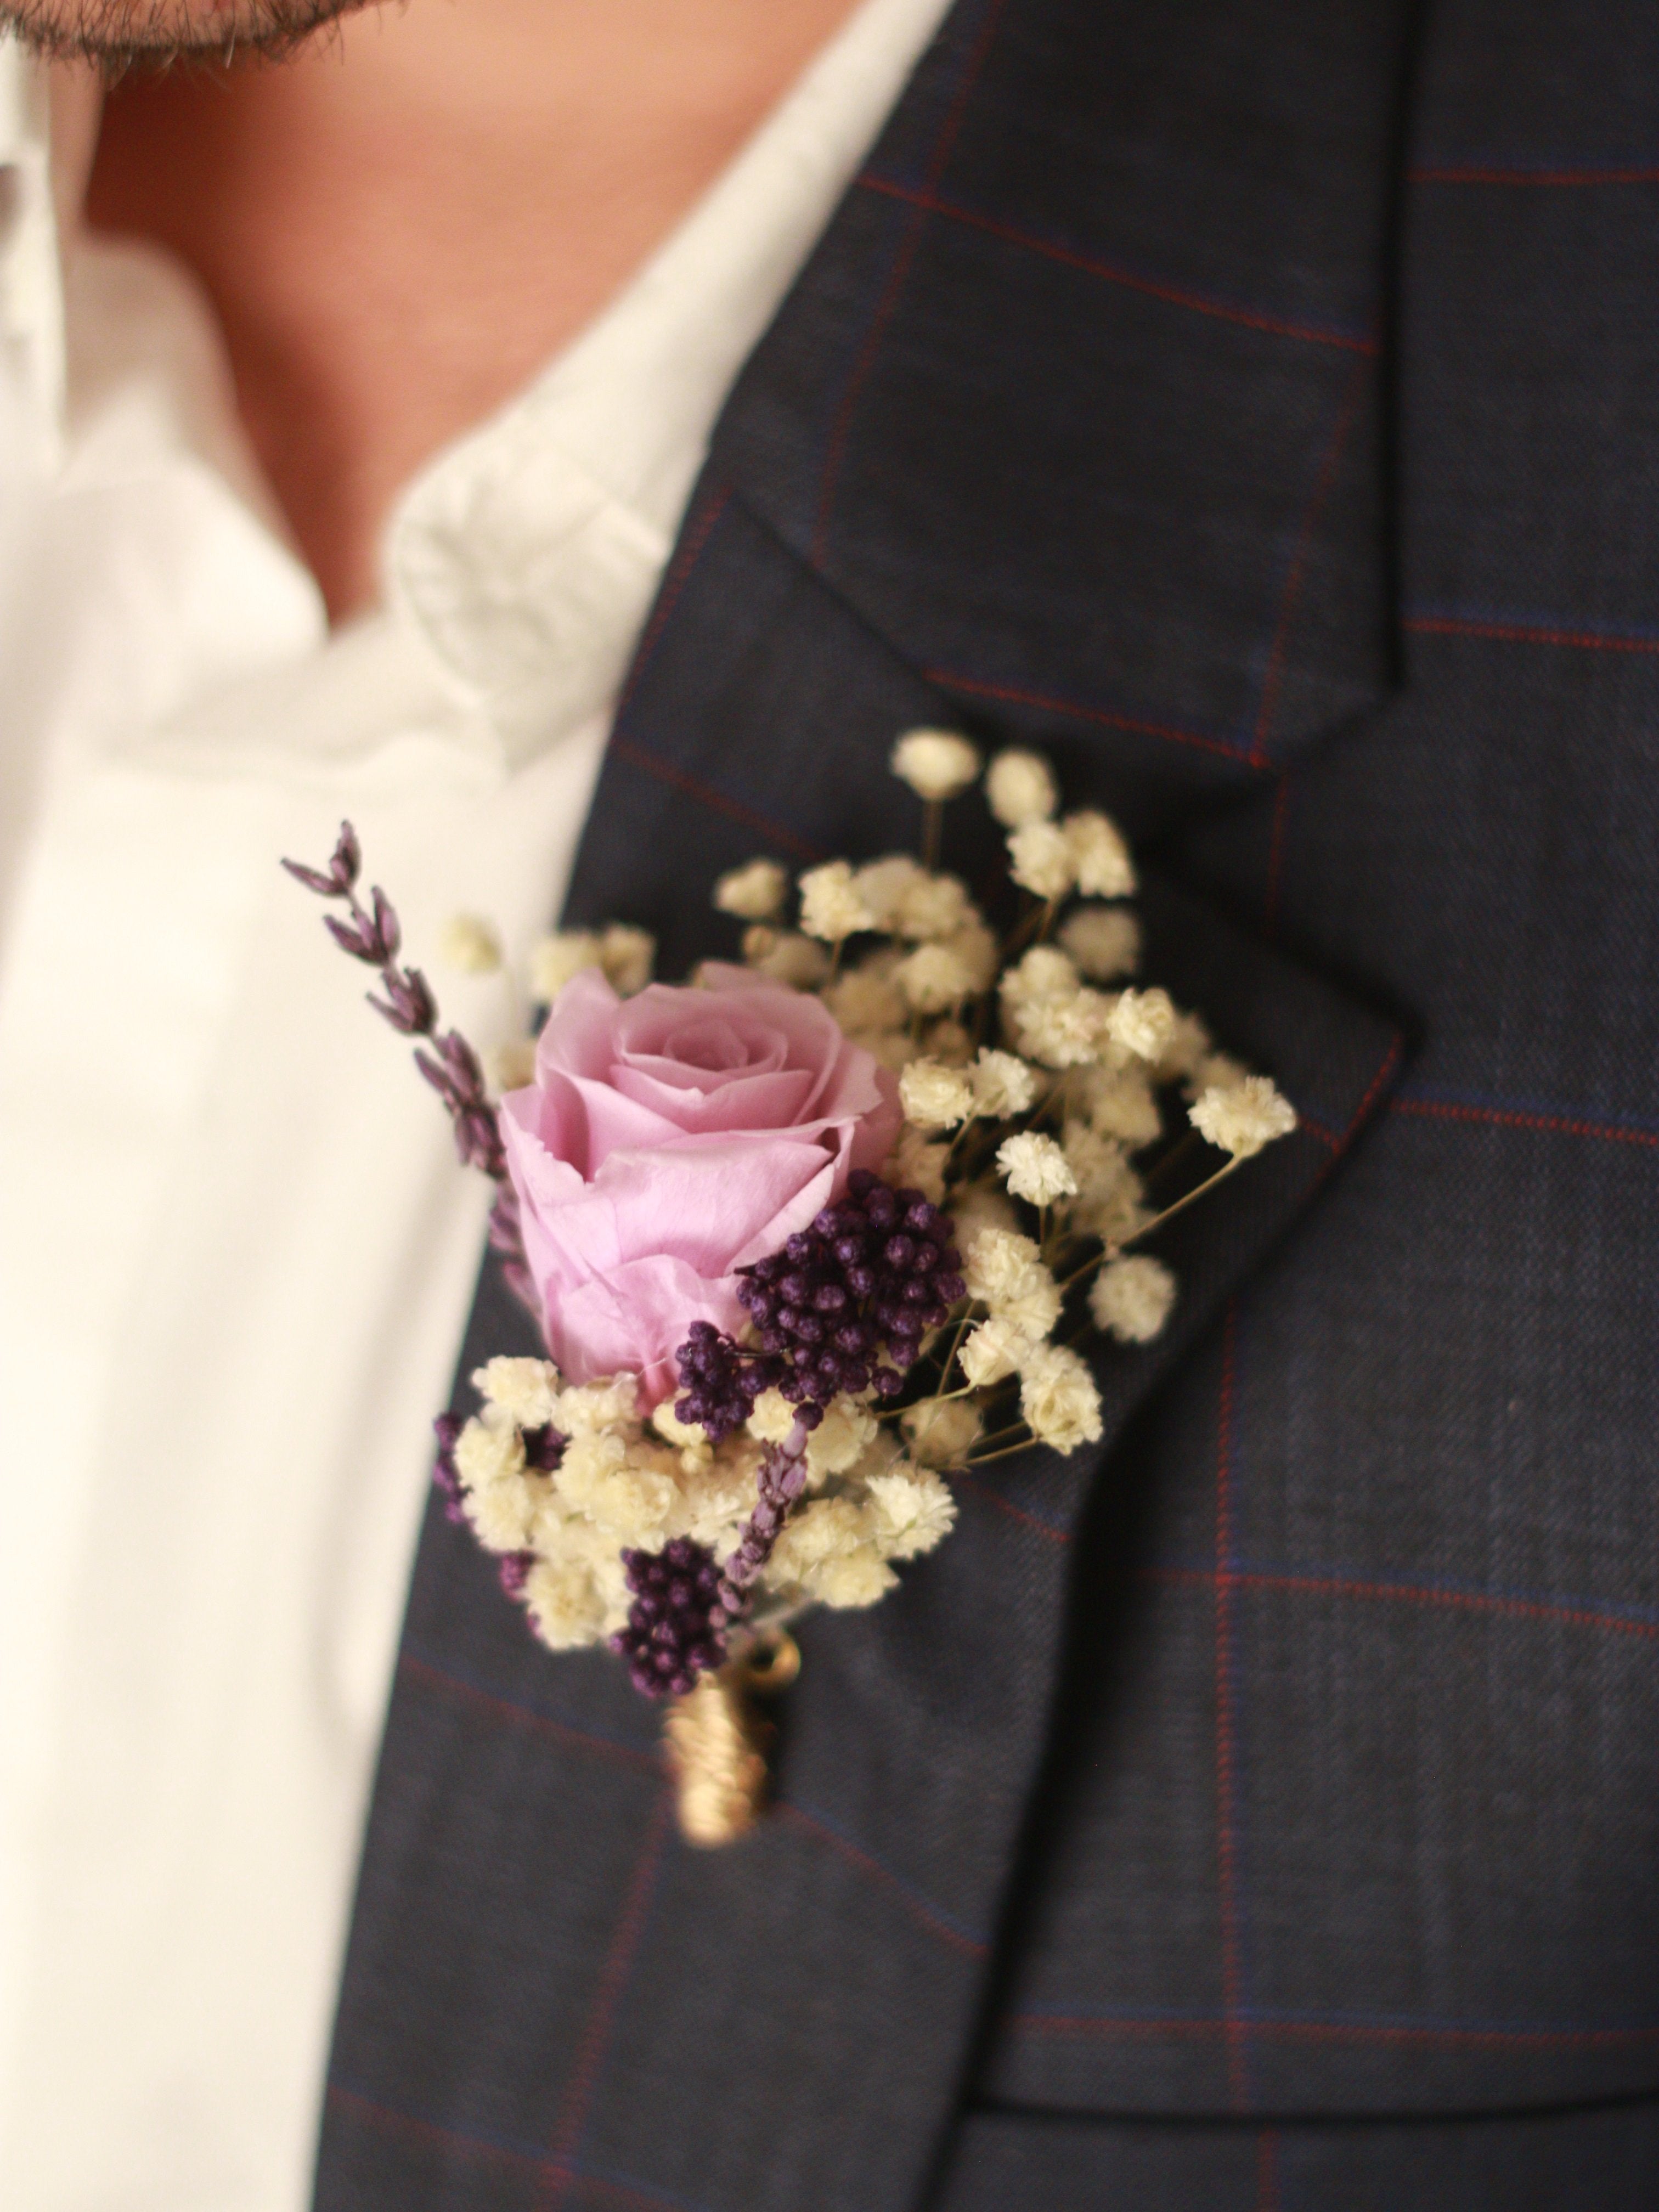 How to style boutonnieres?